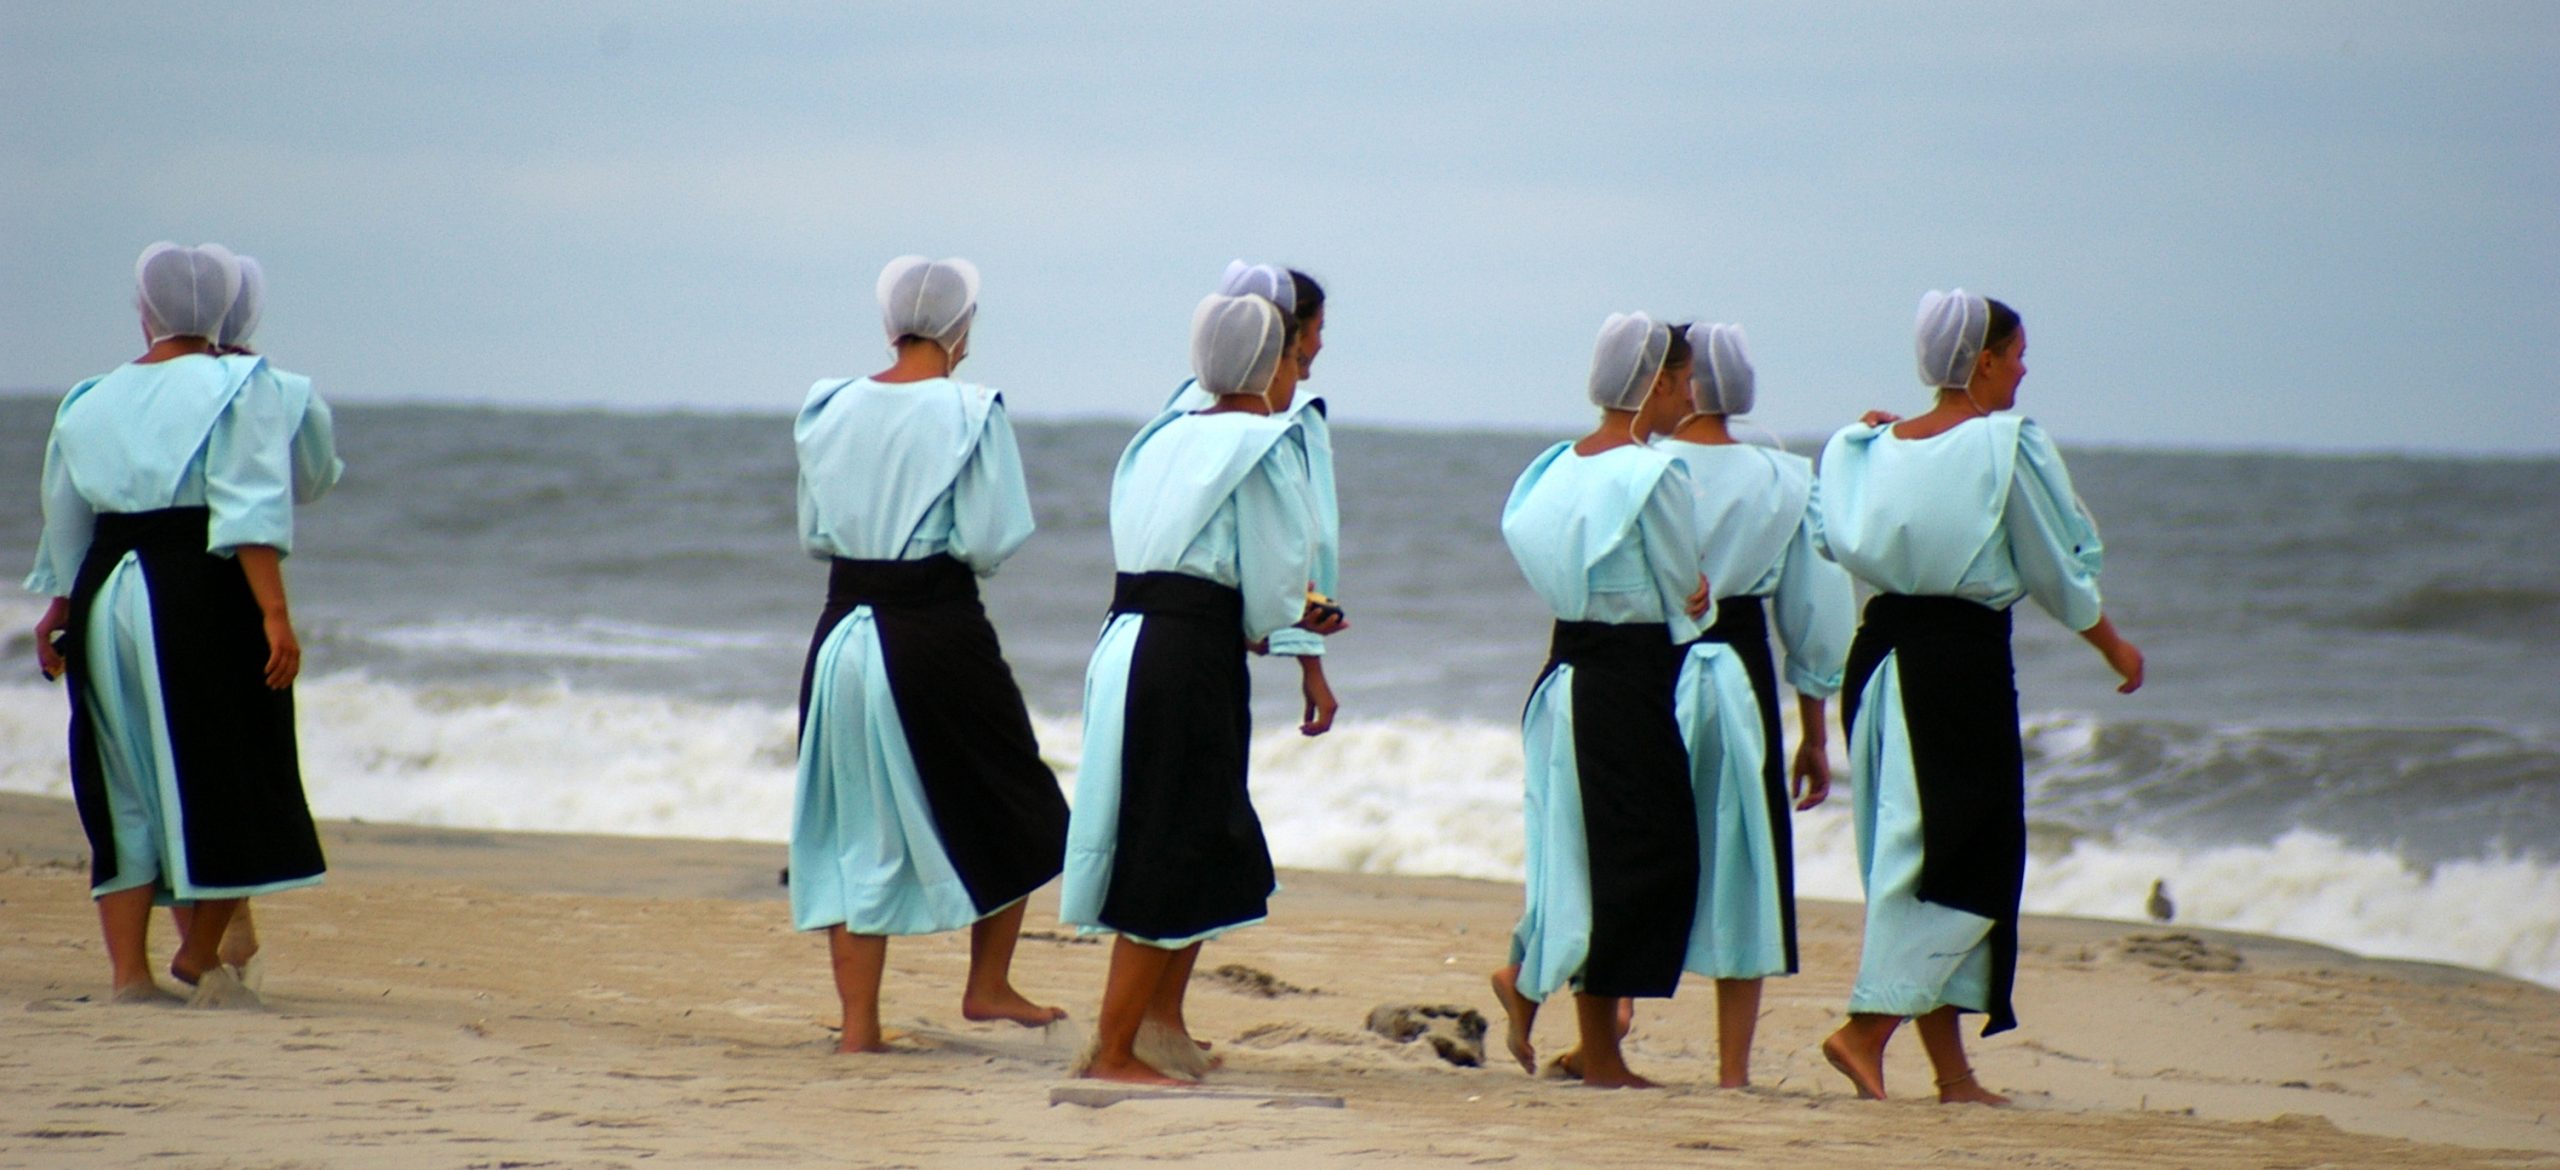 Amish women at the beach (photo by Pasteur, CC 3.0 WikiCommons)